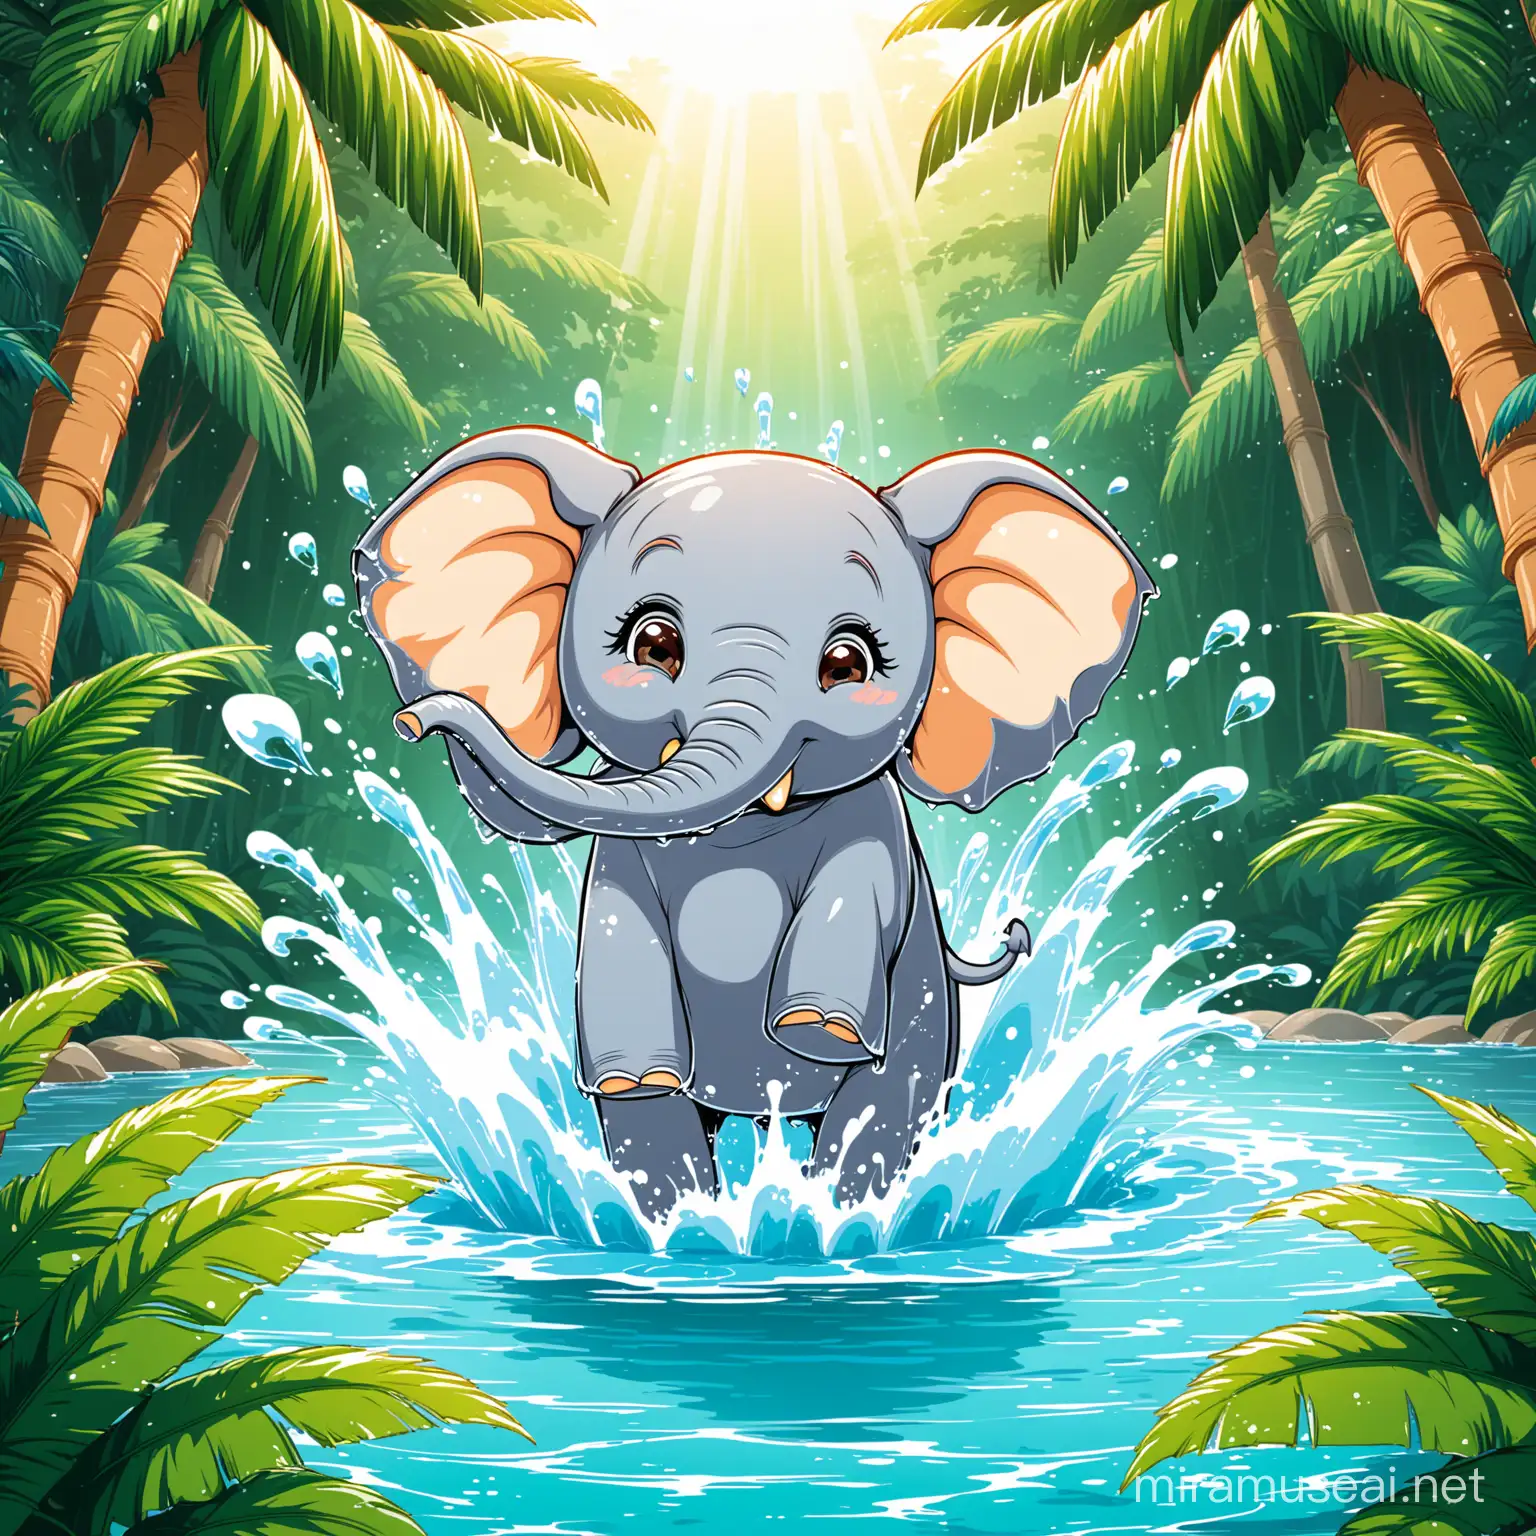 Elephant splashing in the water in the jungle playing cartoon